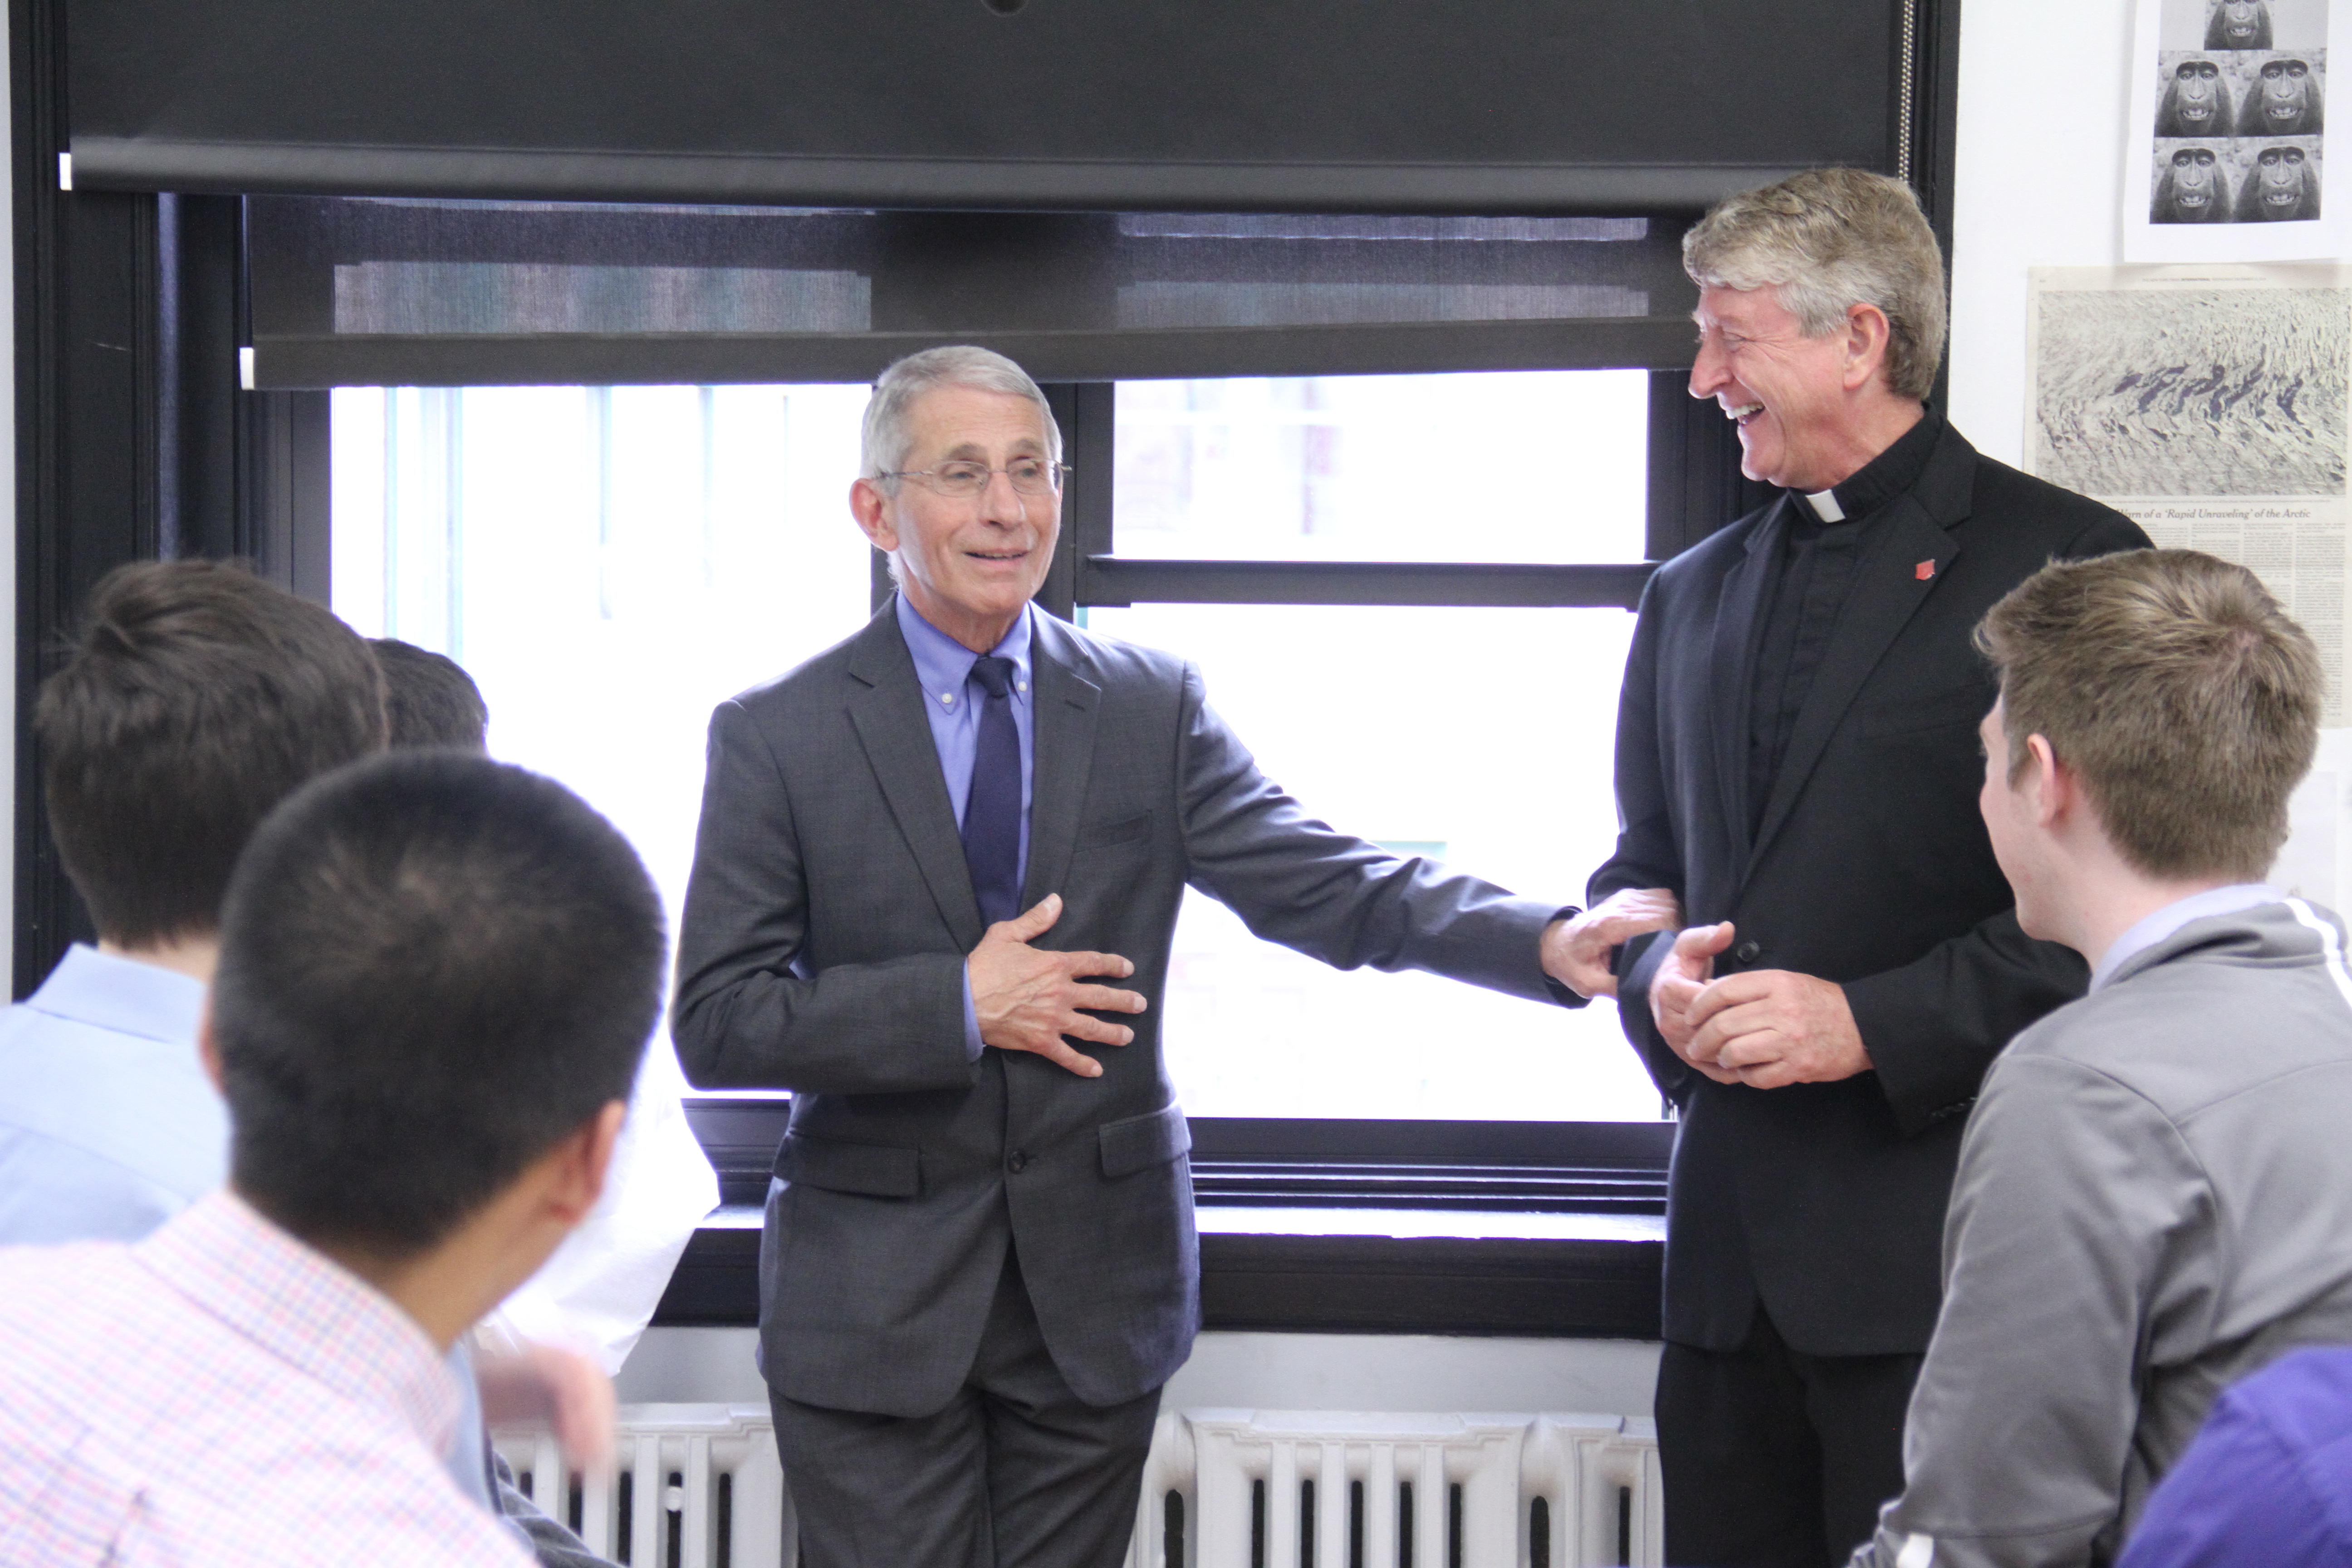 Dr. Anthony Fauci meets with New York City's Regis High School students and the school's president, Jesuit Father Daniel Lahart, in 2019